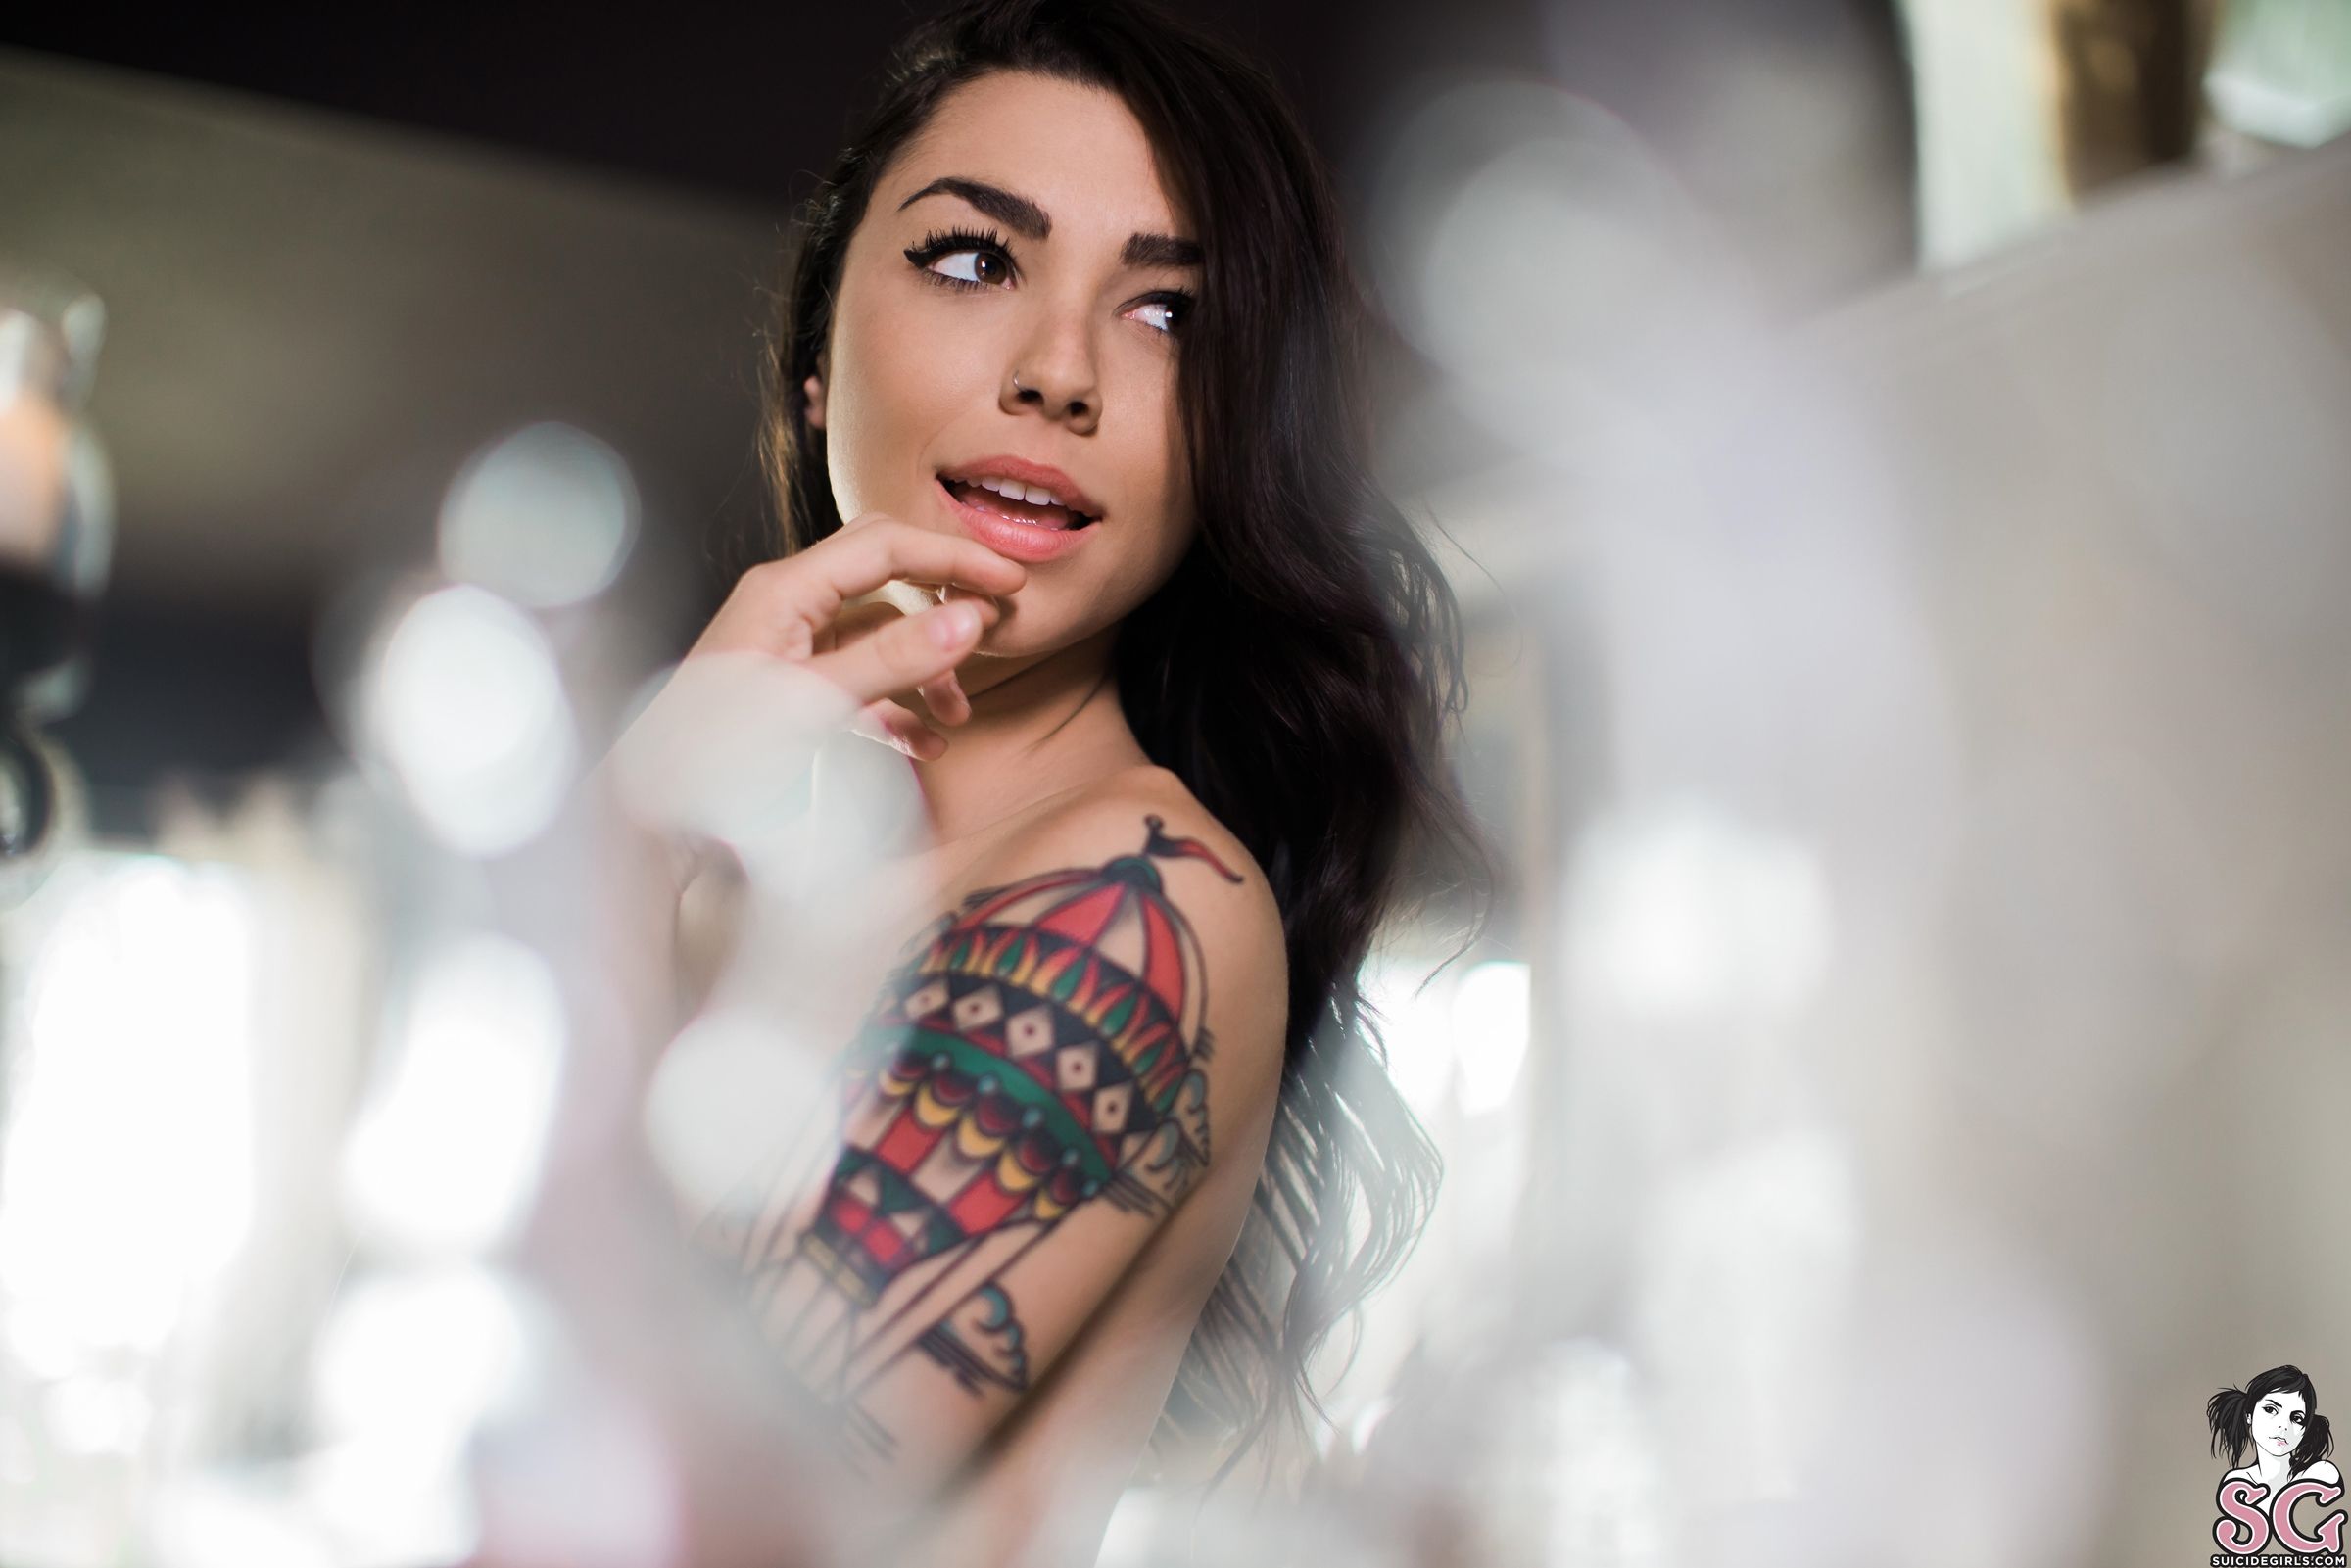 Beautiful Suicide Girl Kailah Timeless (51) High resolution image.